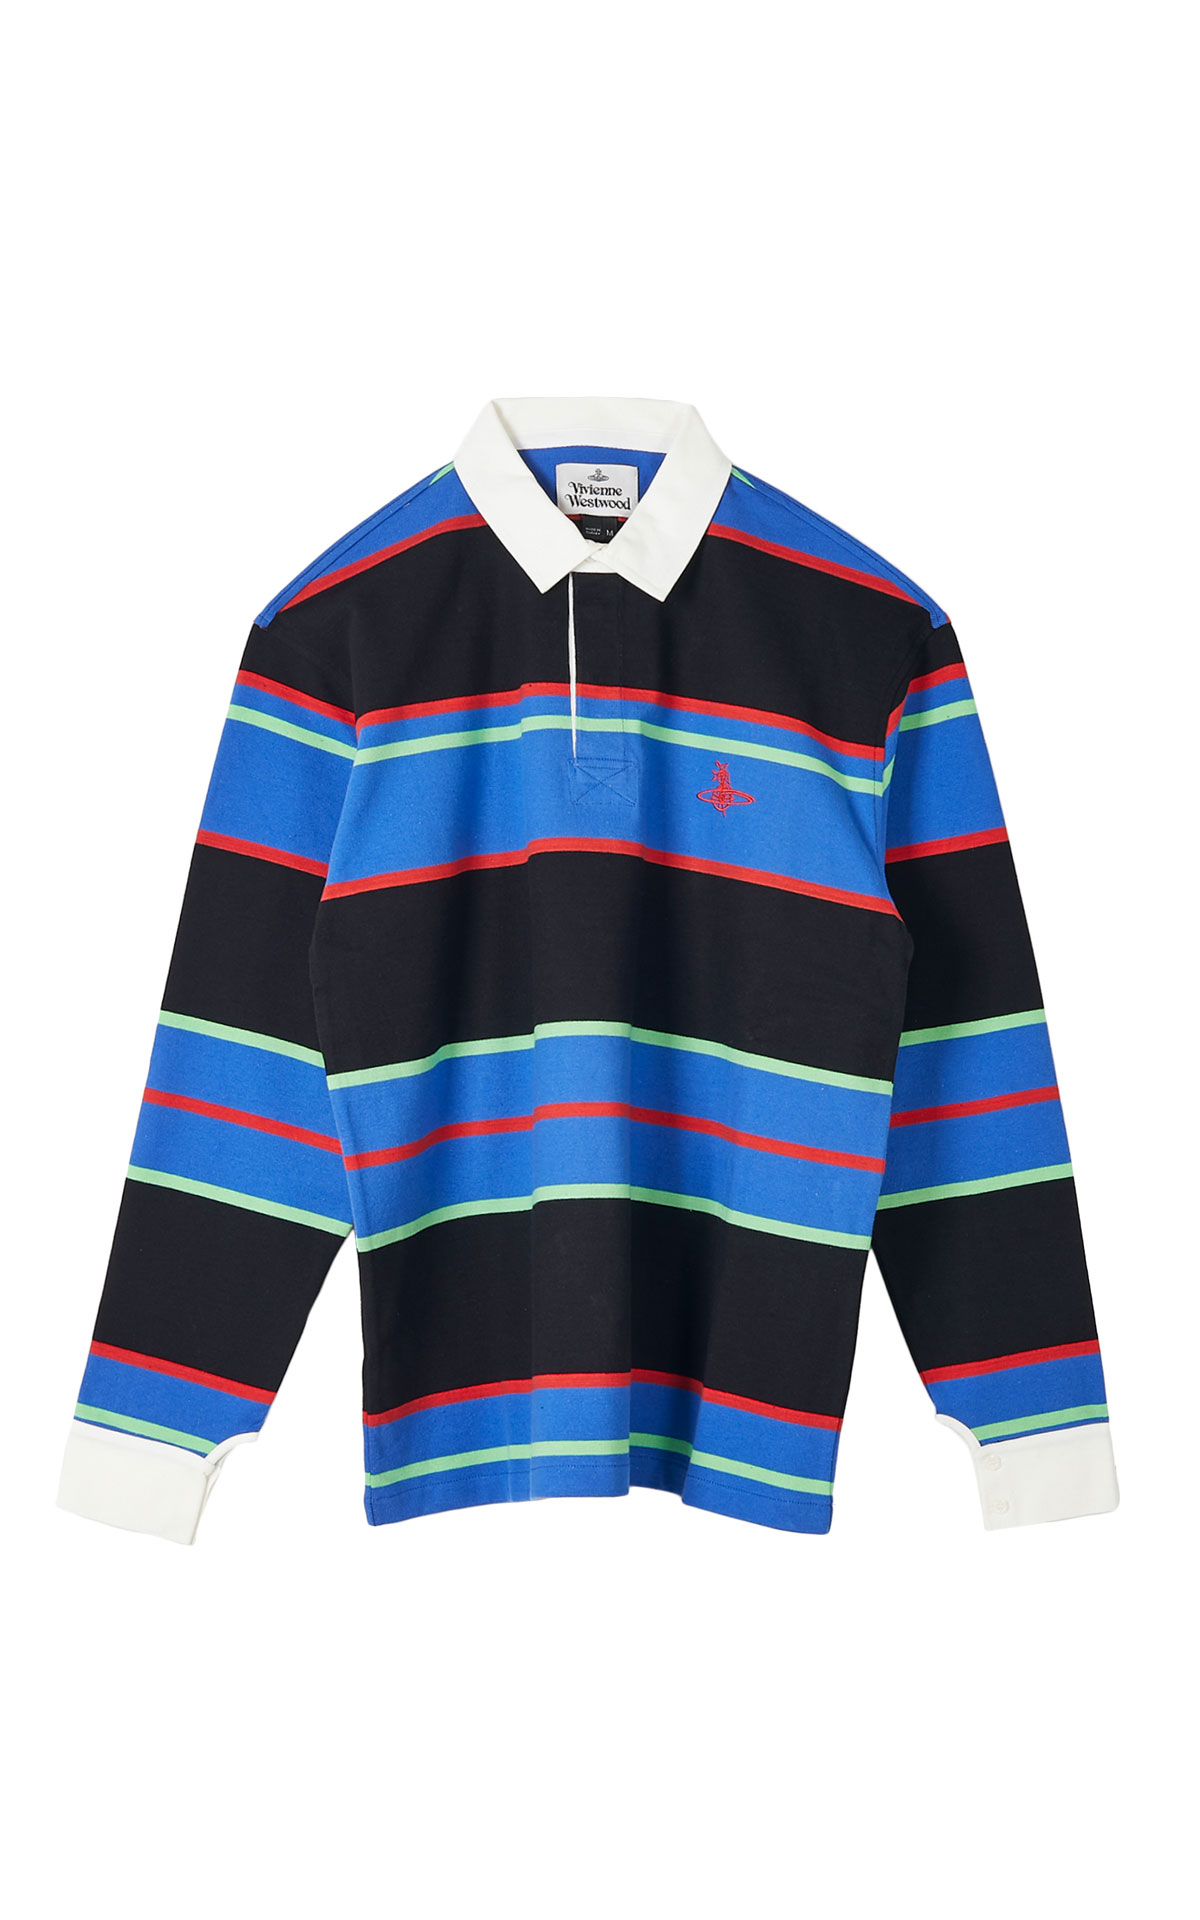 Vivienne Westwood  Rugby poloshirt from Bicester Village